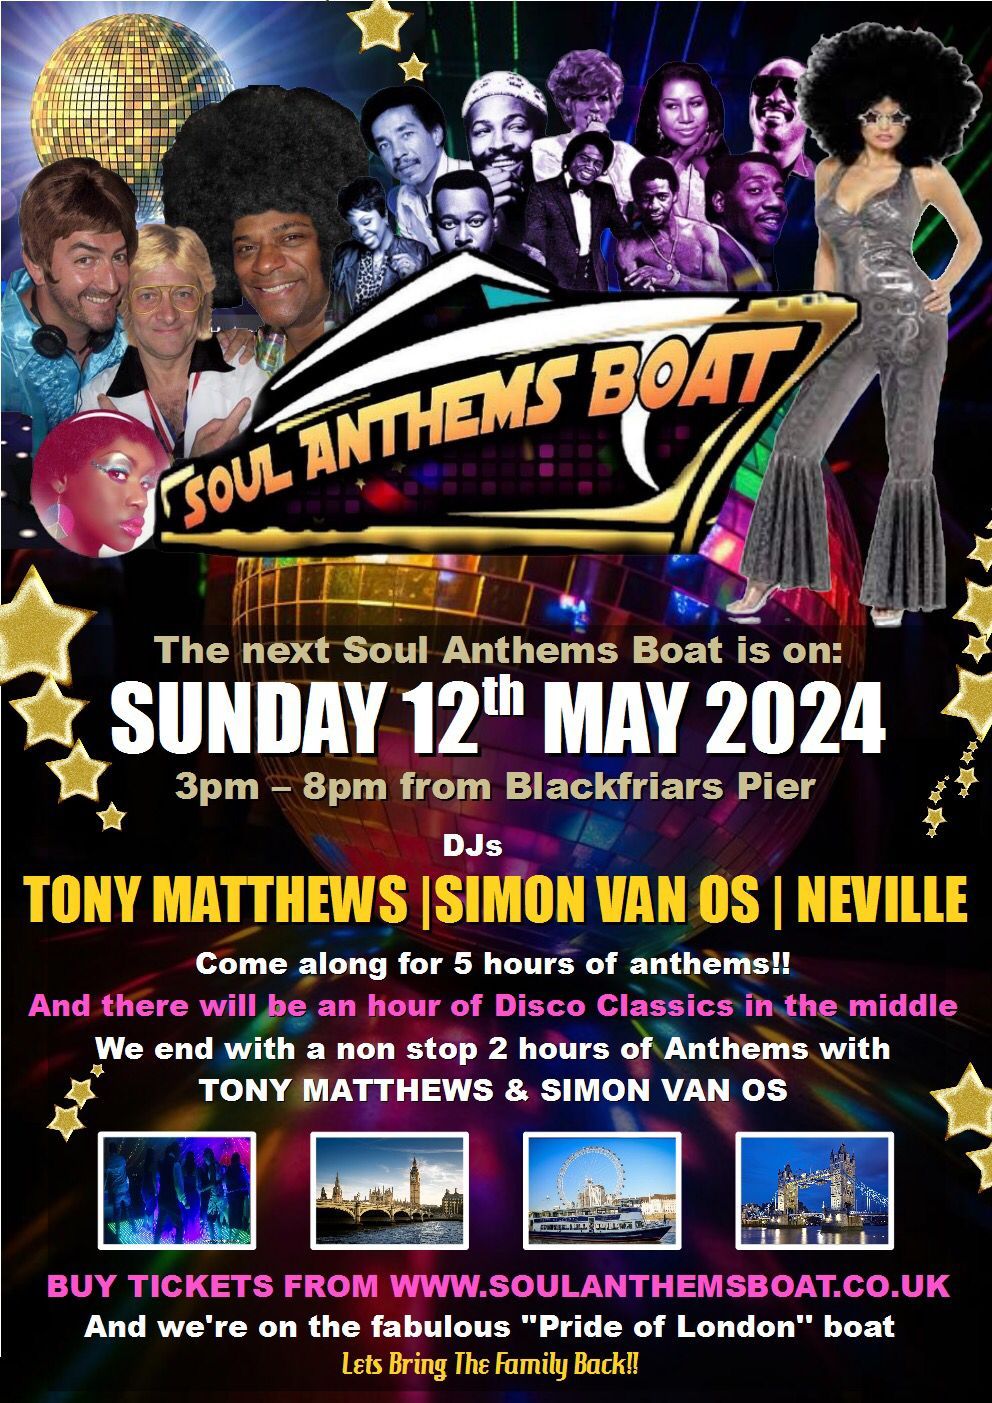 Soul Anthems Boat - 3pm Sunday 12th May 2024